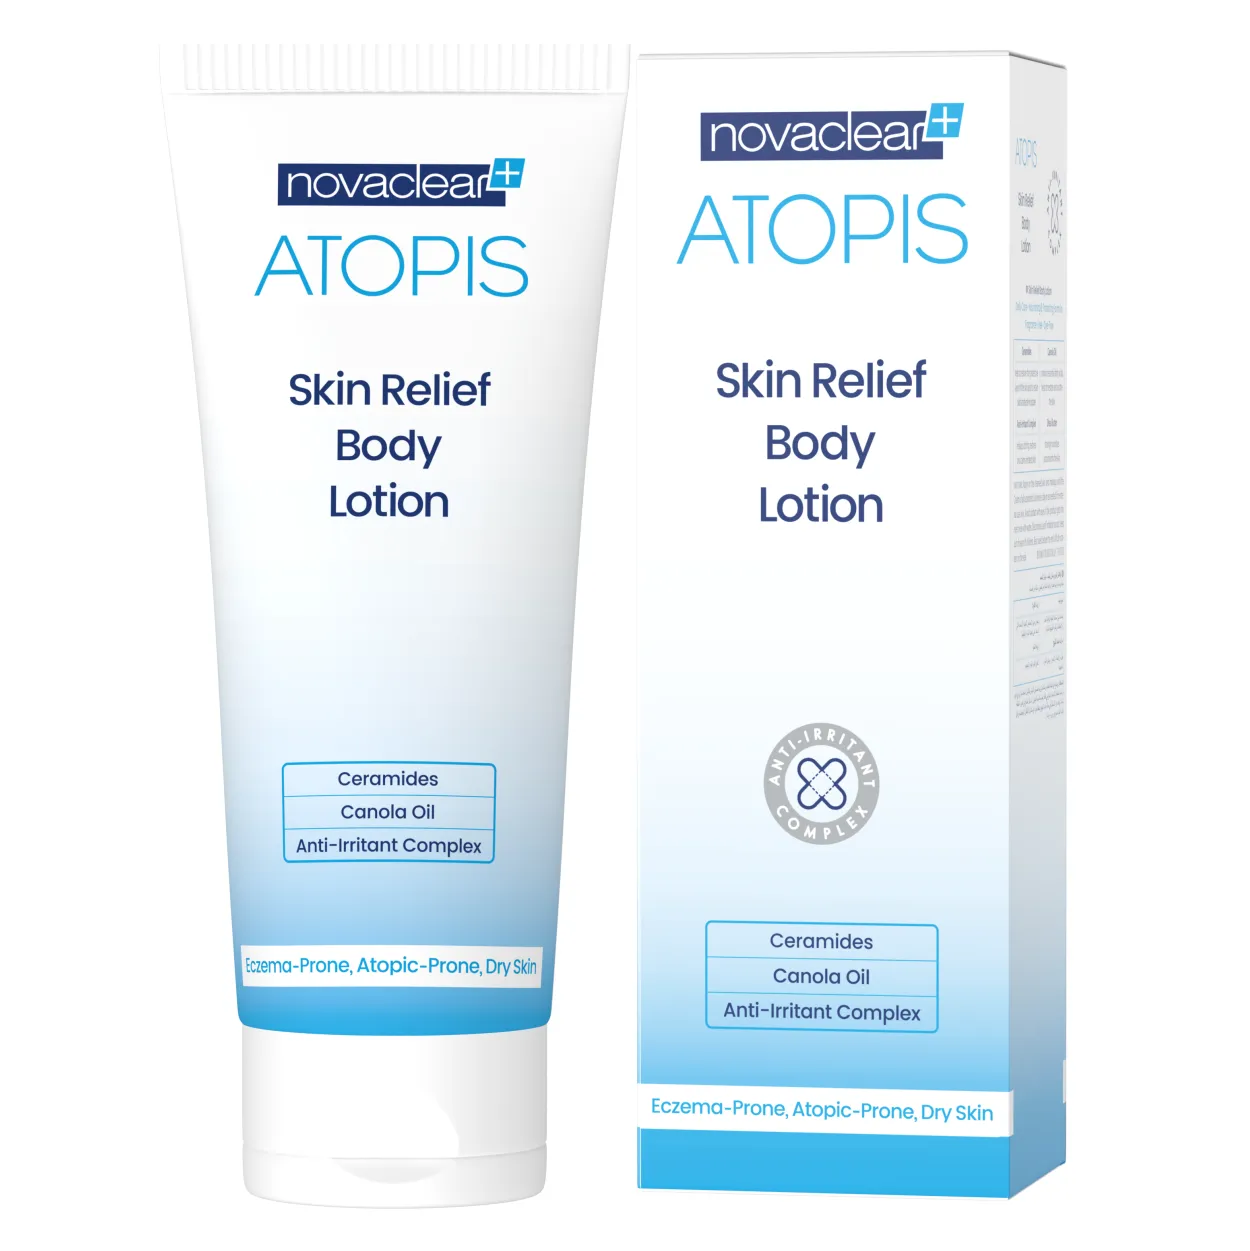 novaclear-atopis-skin-relief-body-lotion-box-